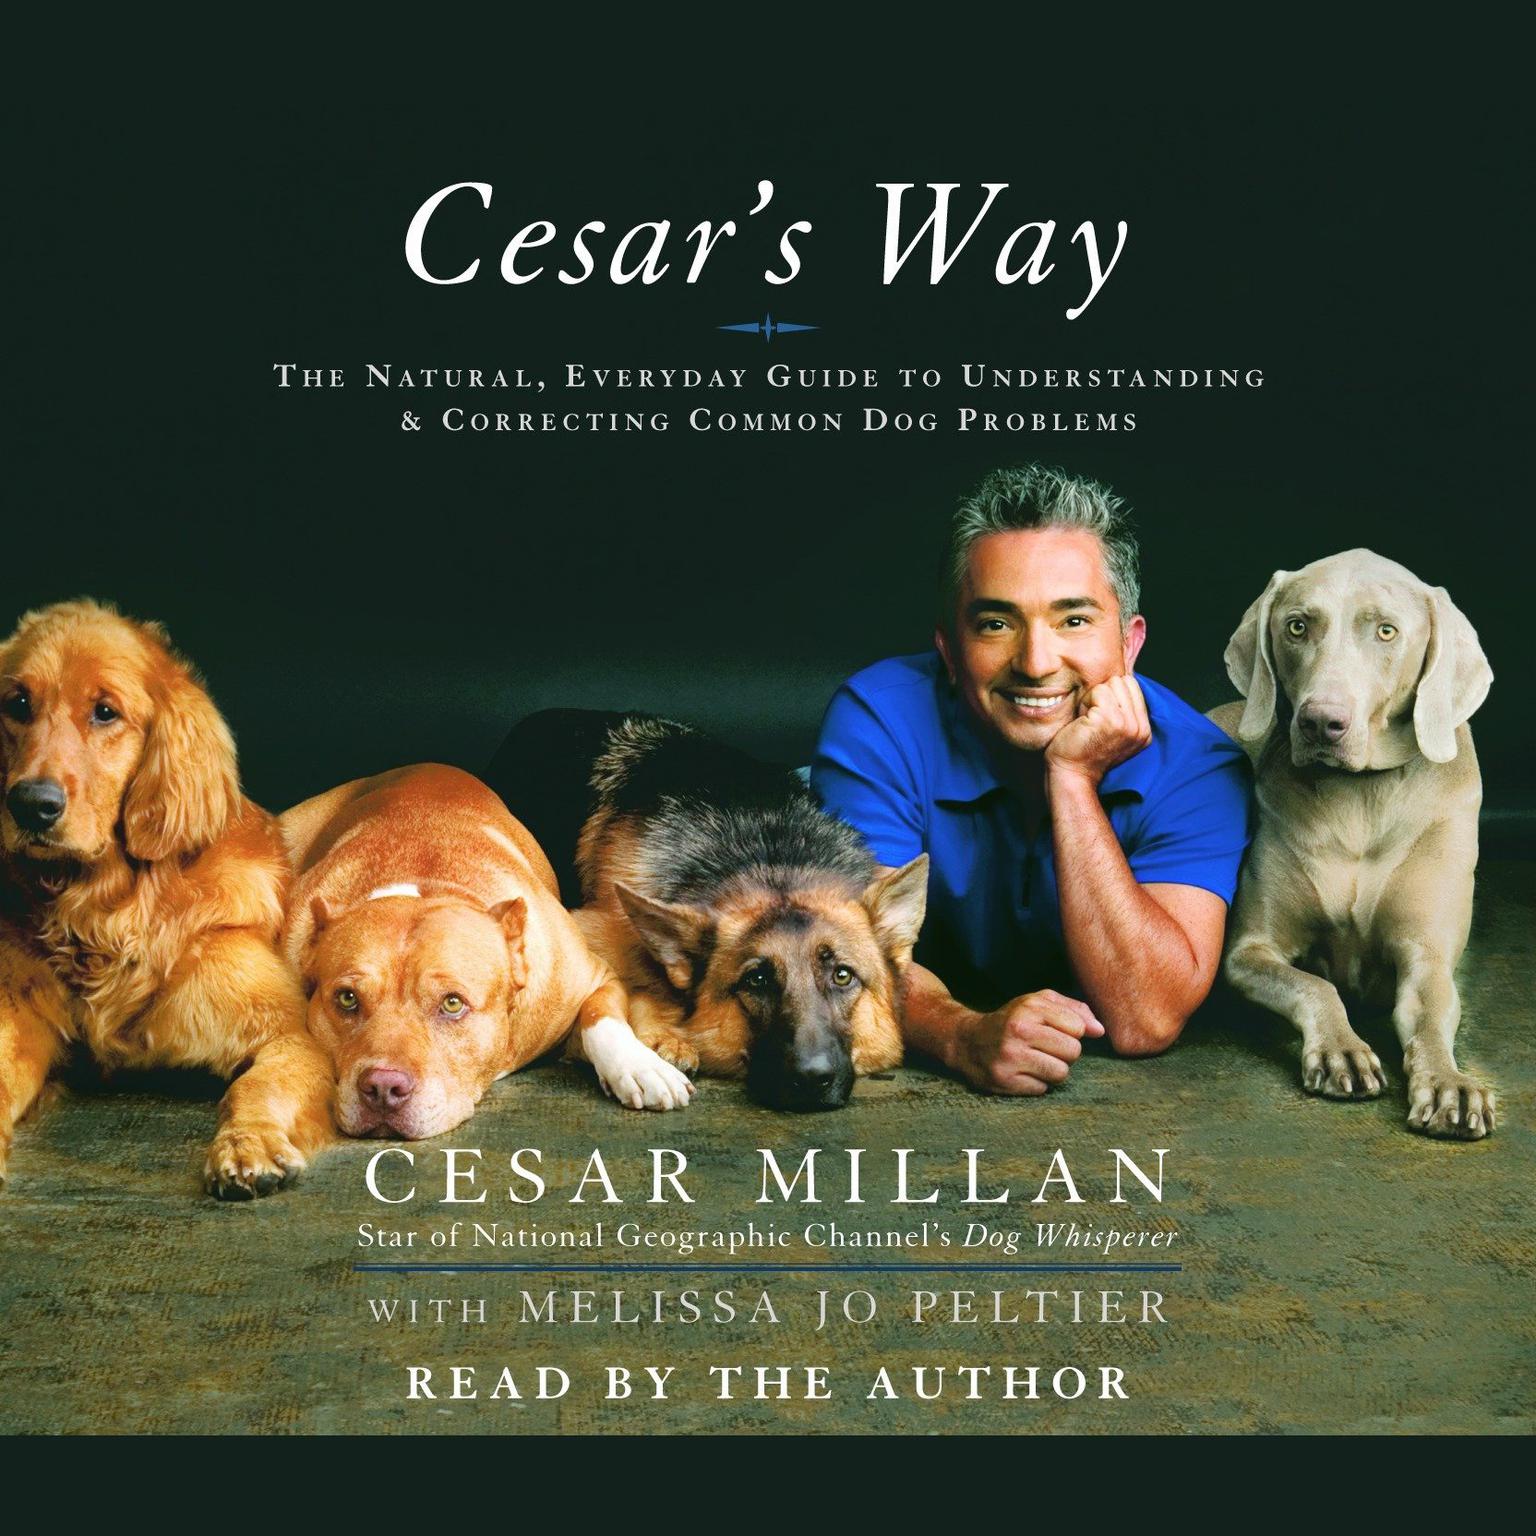 Cesars Way: The Natural, Everyday Guide to Understanding and Correcting Common Dog Problems Audiobook, by Cesar Millan